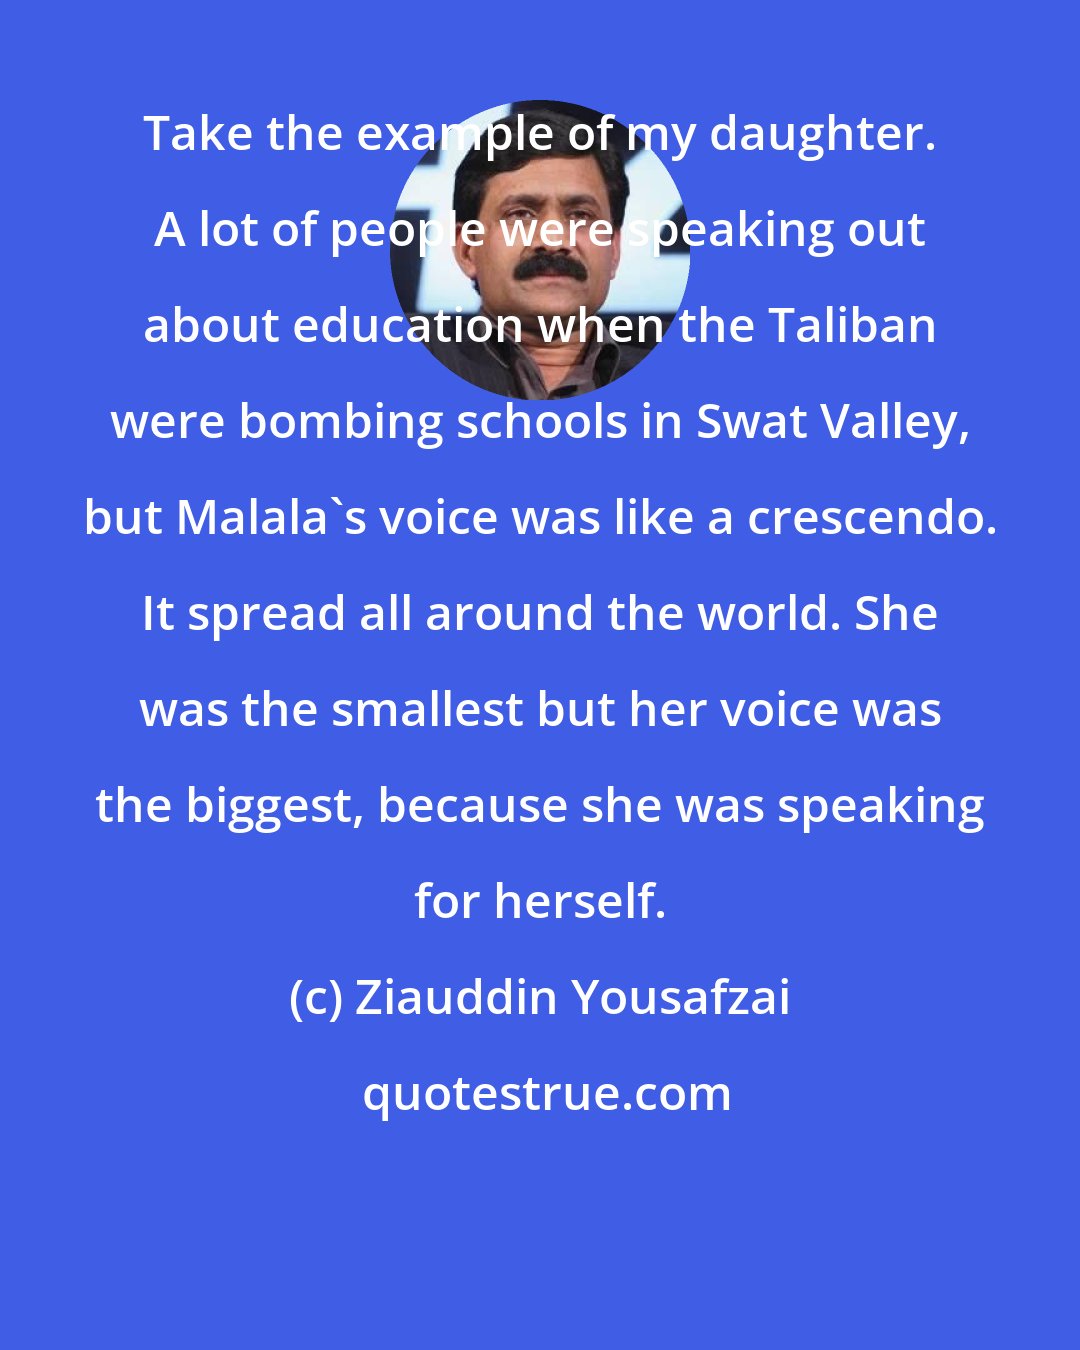 Ziauddin Yousafzai: Take the example of my daughter. A lot of people were speaking out about education when the Taliban were bombing schools in Swat Valley, but Malala's voice was like a crescendo. It spread all around the world. She was the smallest but her voice was the biggest, because she was speaking for herself.